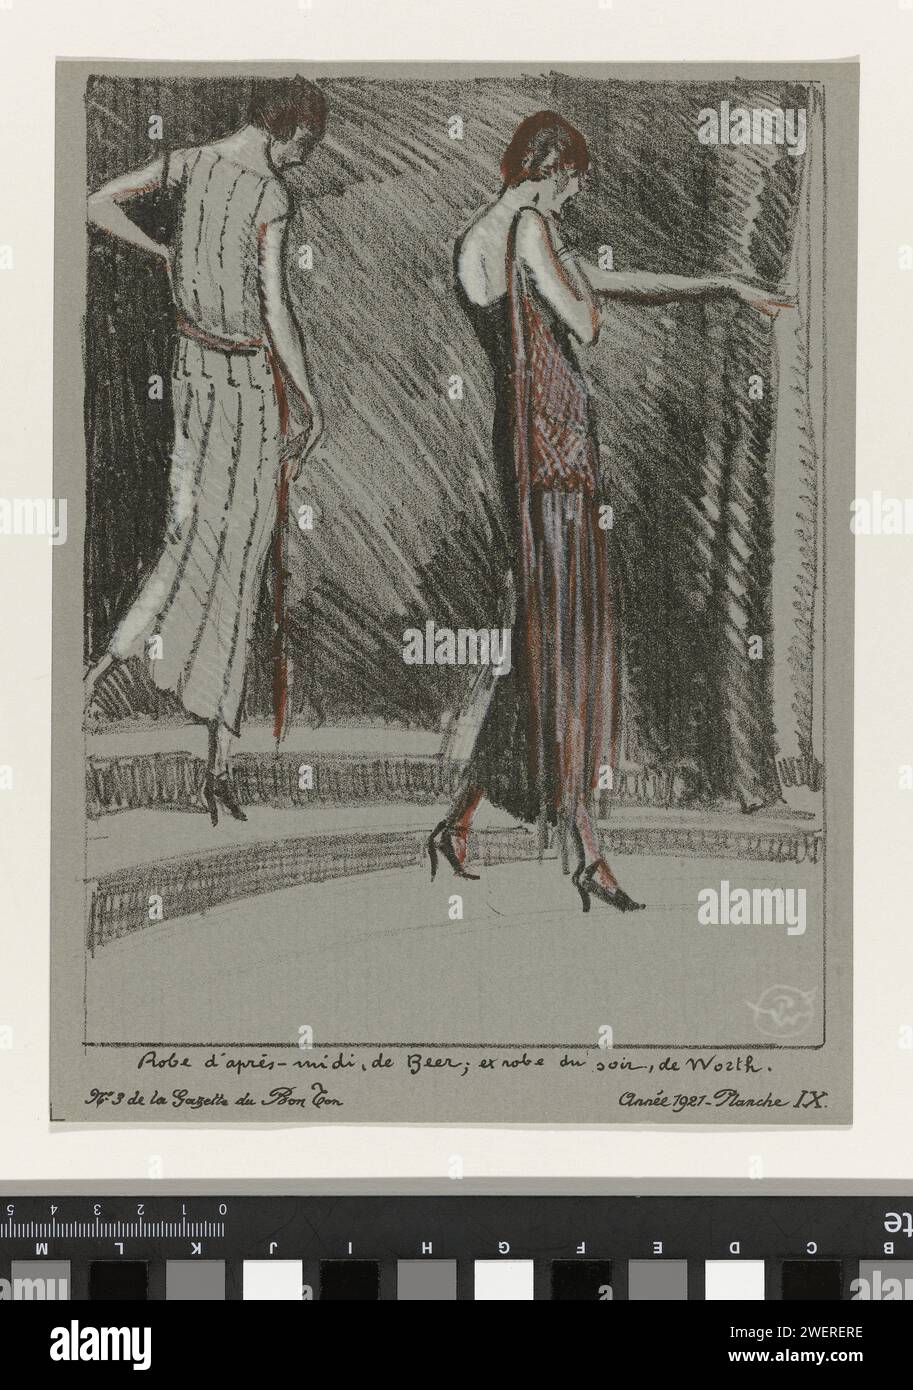 Gazette du Bon Ton, 1921 - No. 3, pl. IX: afternoon dress, beer; and evening dress, from Worth., Porter Woodruff, 1921  Two women, seen on the back, dressed in an afternoon gown of Beer and an evening gown from Worth, walking on a staircase in a nightlife. Planche IX from a series of four lithographs entitled: 'Les Modes and L'An de Grace Mil Neuf Cent Vingt Un', from Gazette du Bon Ton 1921, No. 3. Explanation about the clothing on page 'Explication des planches'.  paper  fashion plates. dress, gown: evening dress (+ women's clothes). Stock Photo